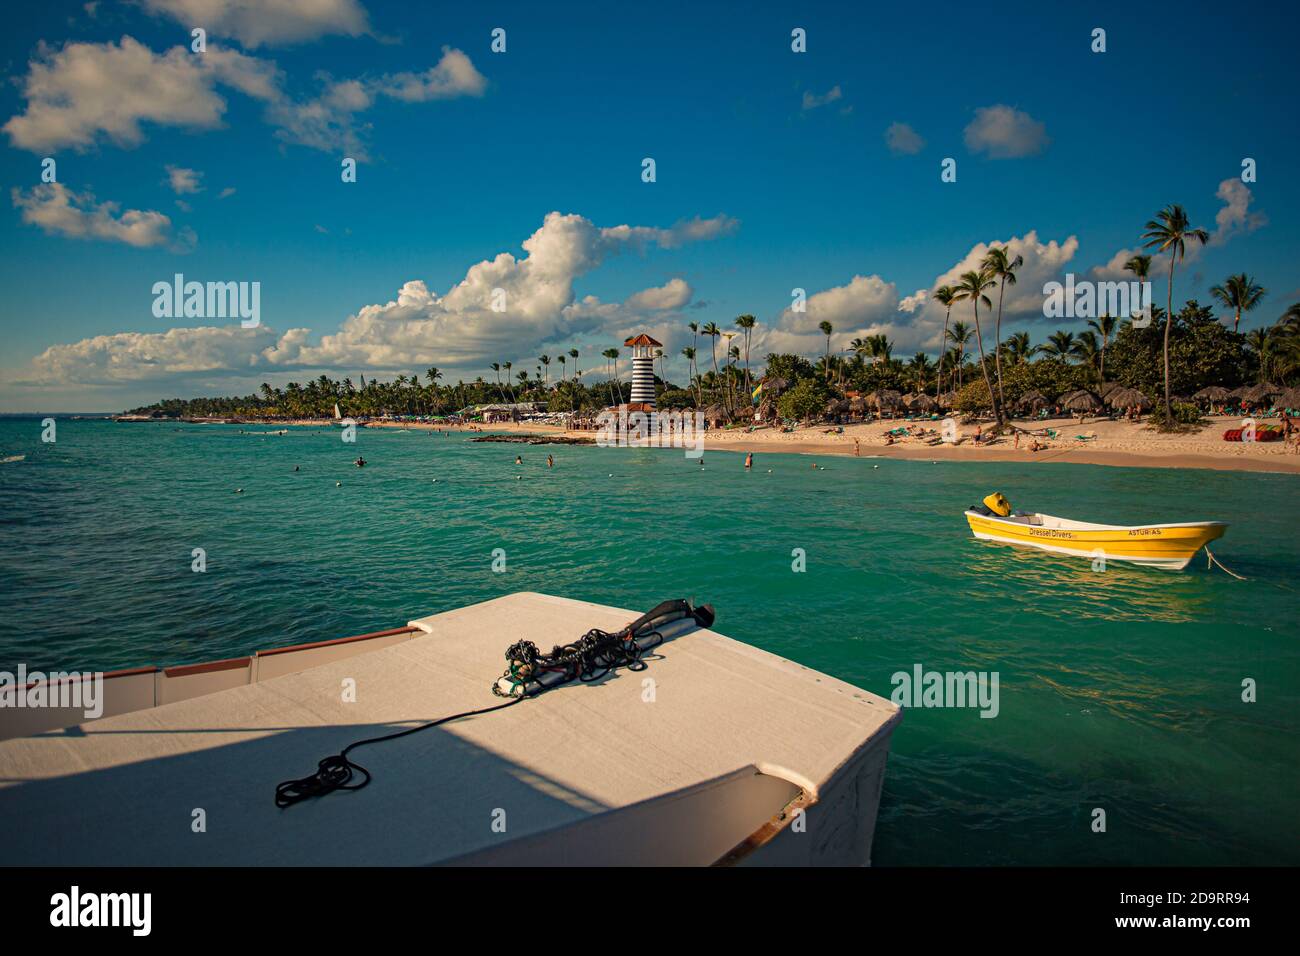 DOMINICUS, DOMINICAN REPUBLIC 6 FEBRAURY 2020: Dominicus Beach from the sea detail at sunset, Dominican republic Stock Photo